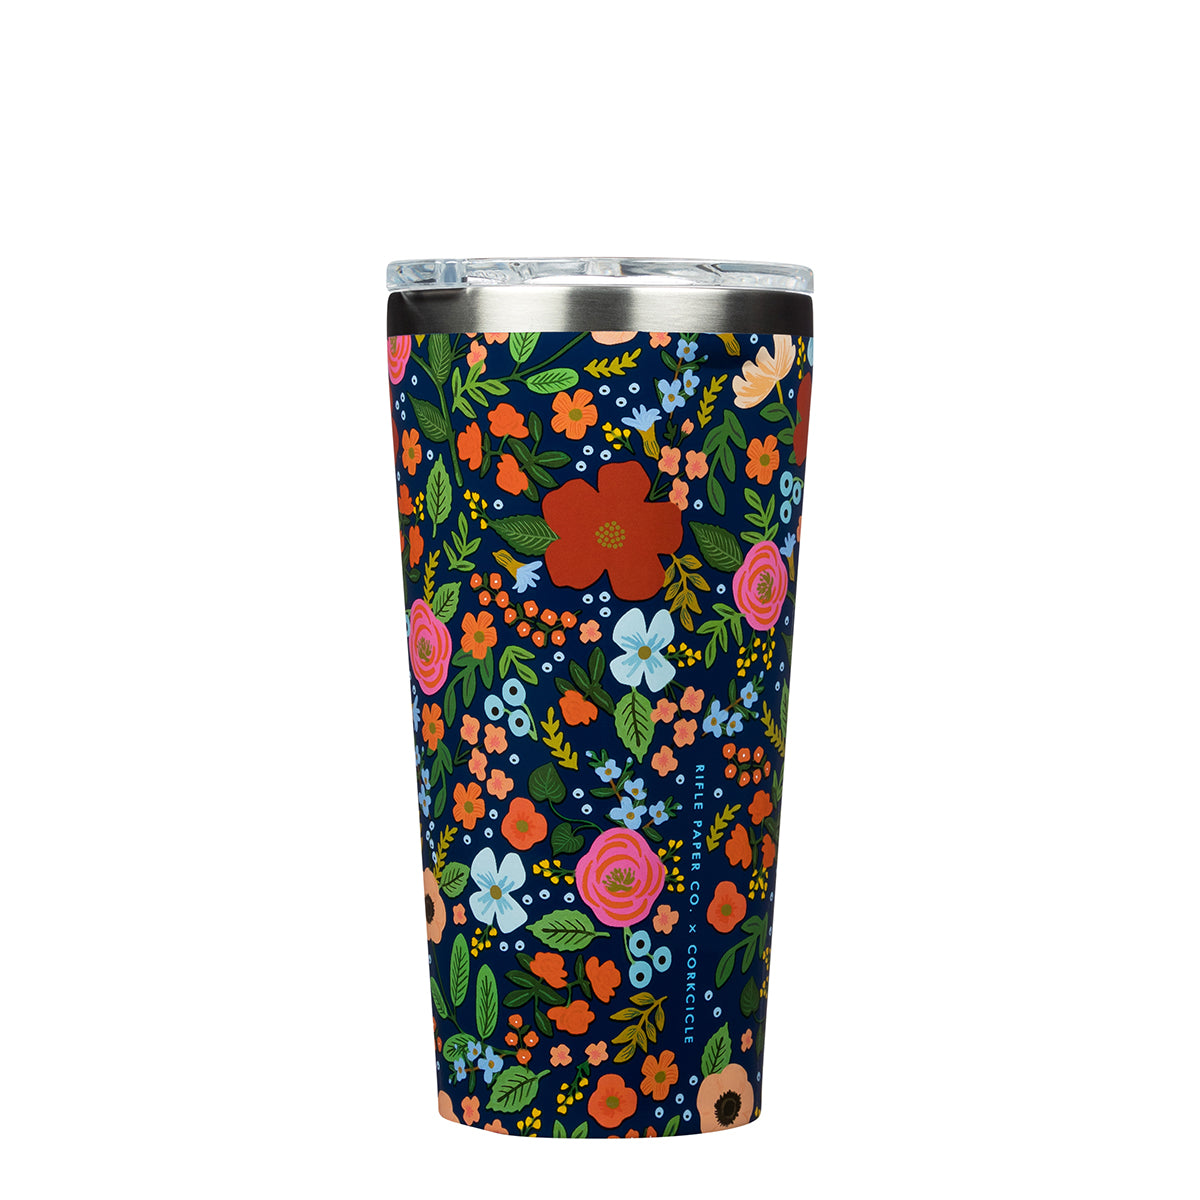 CORKCICLE x RIFLE Stainless Steel Insulated Tumbler 16oz (470ml) - Wild Rose **CLEARANCE**